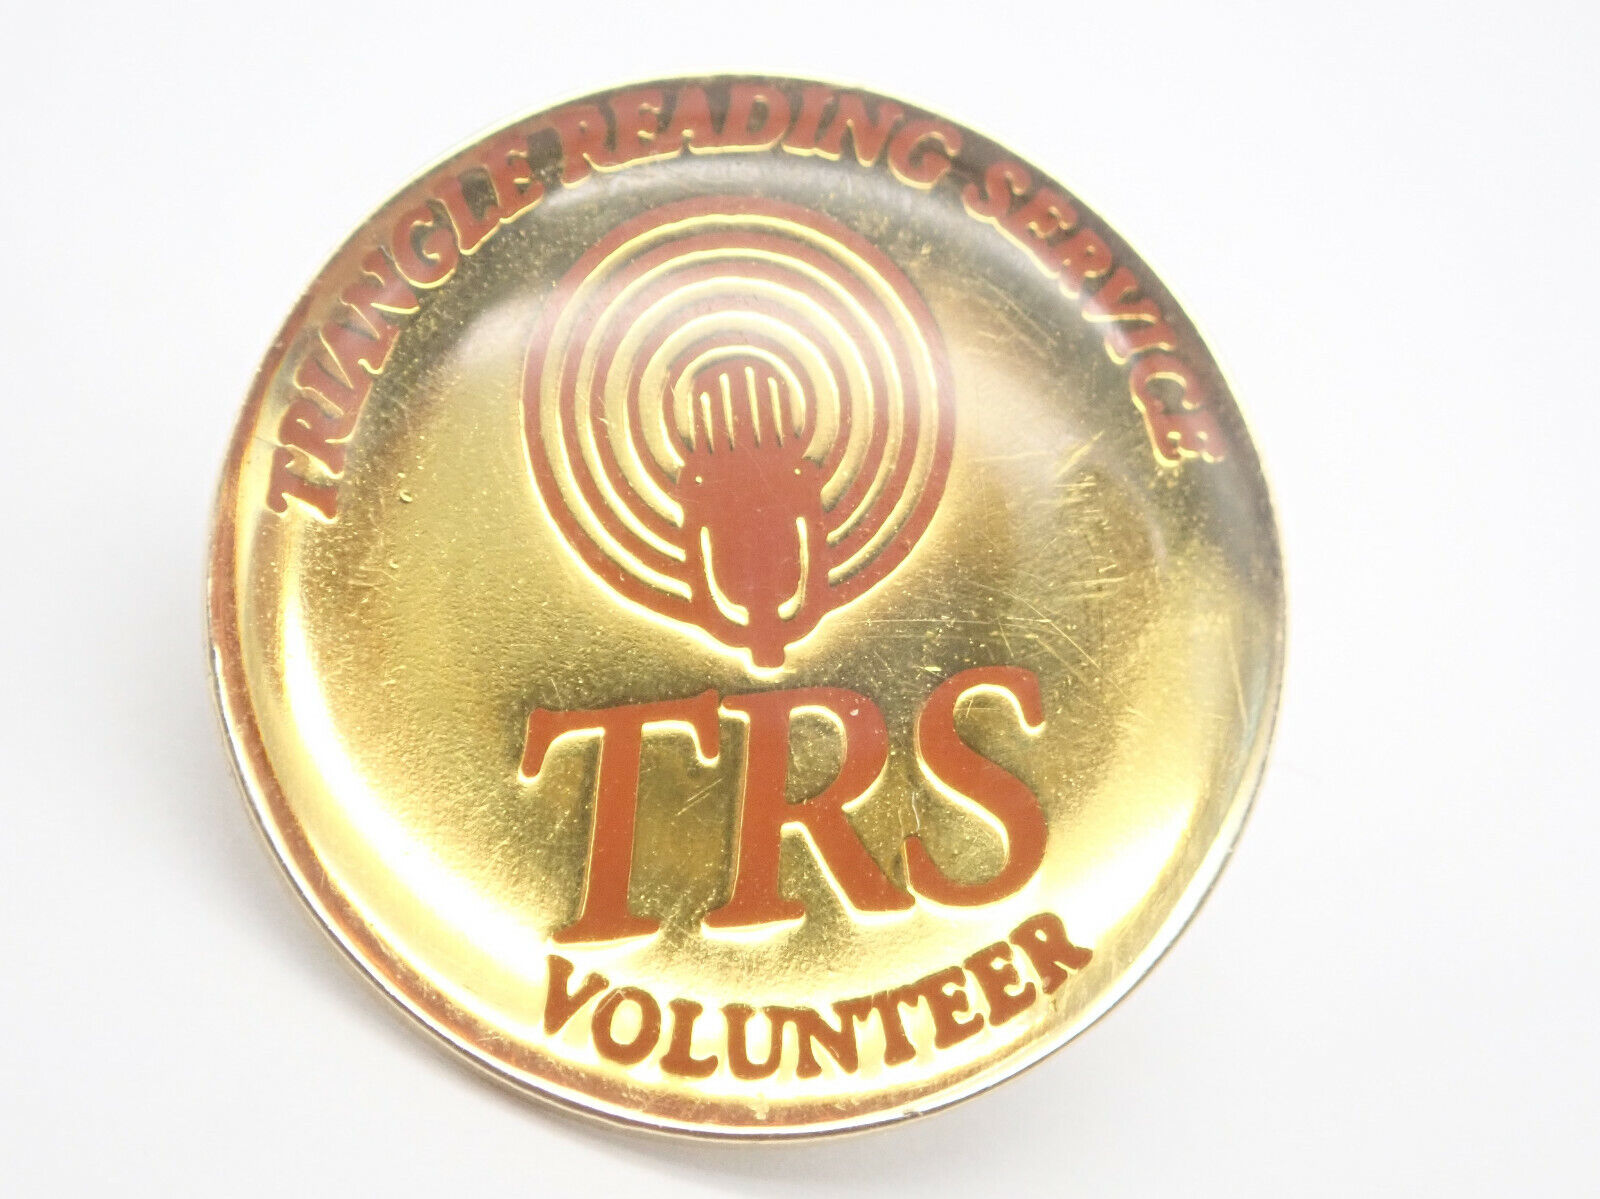 Triangle Reading Service TRS Volunteer Vintage Lapel Pin